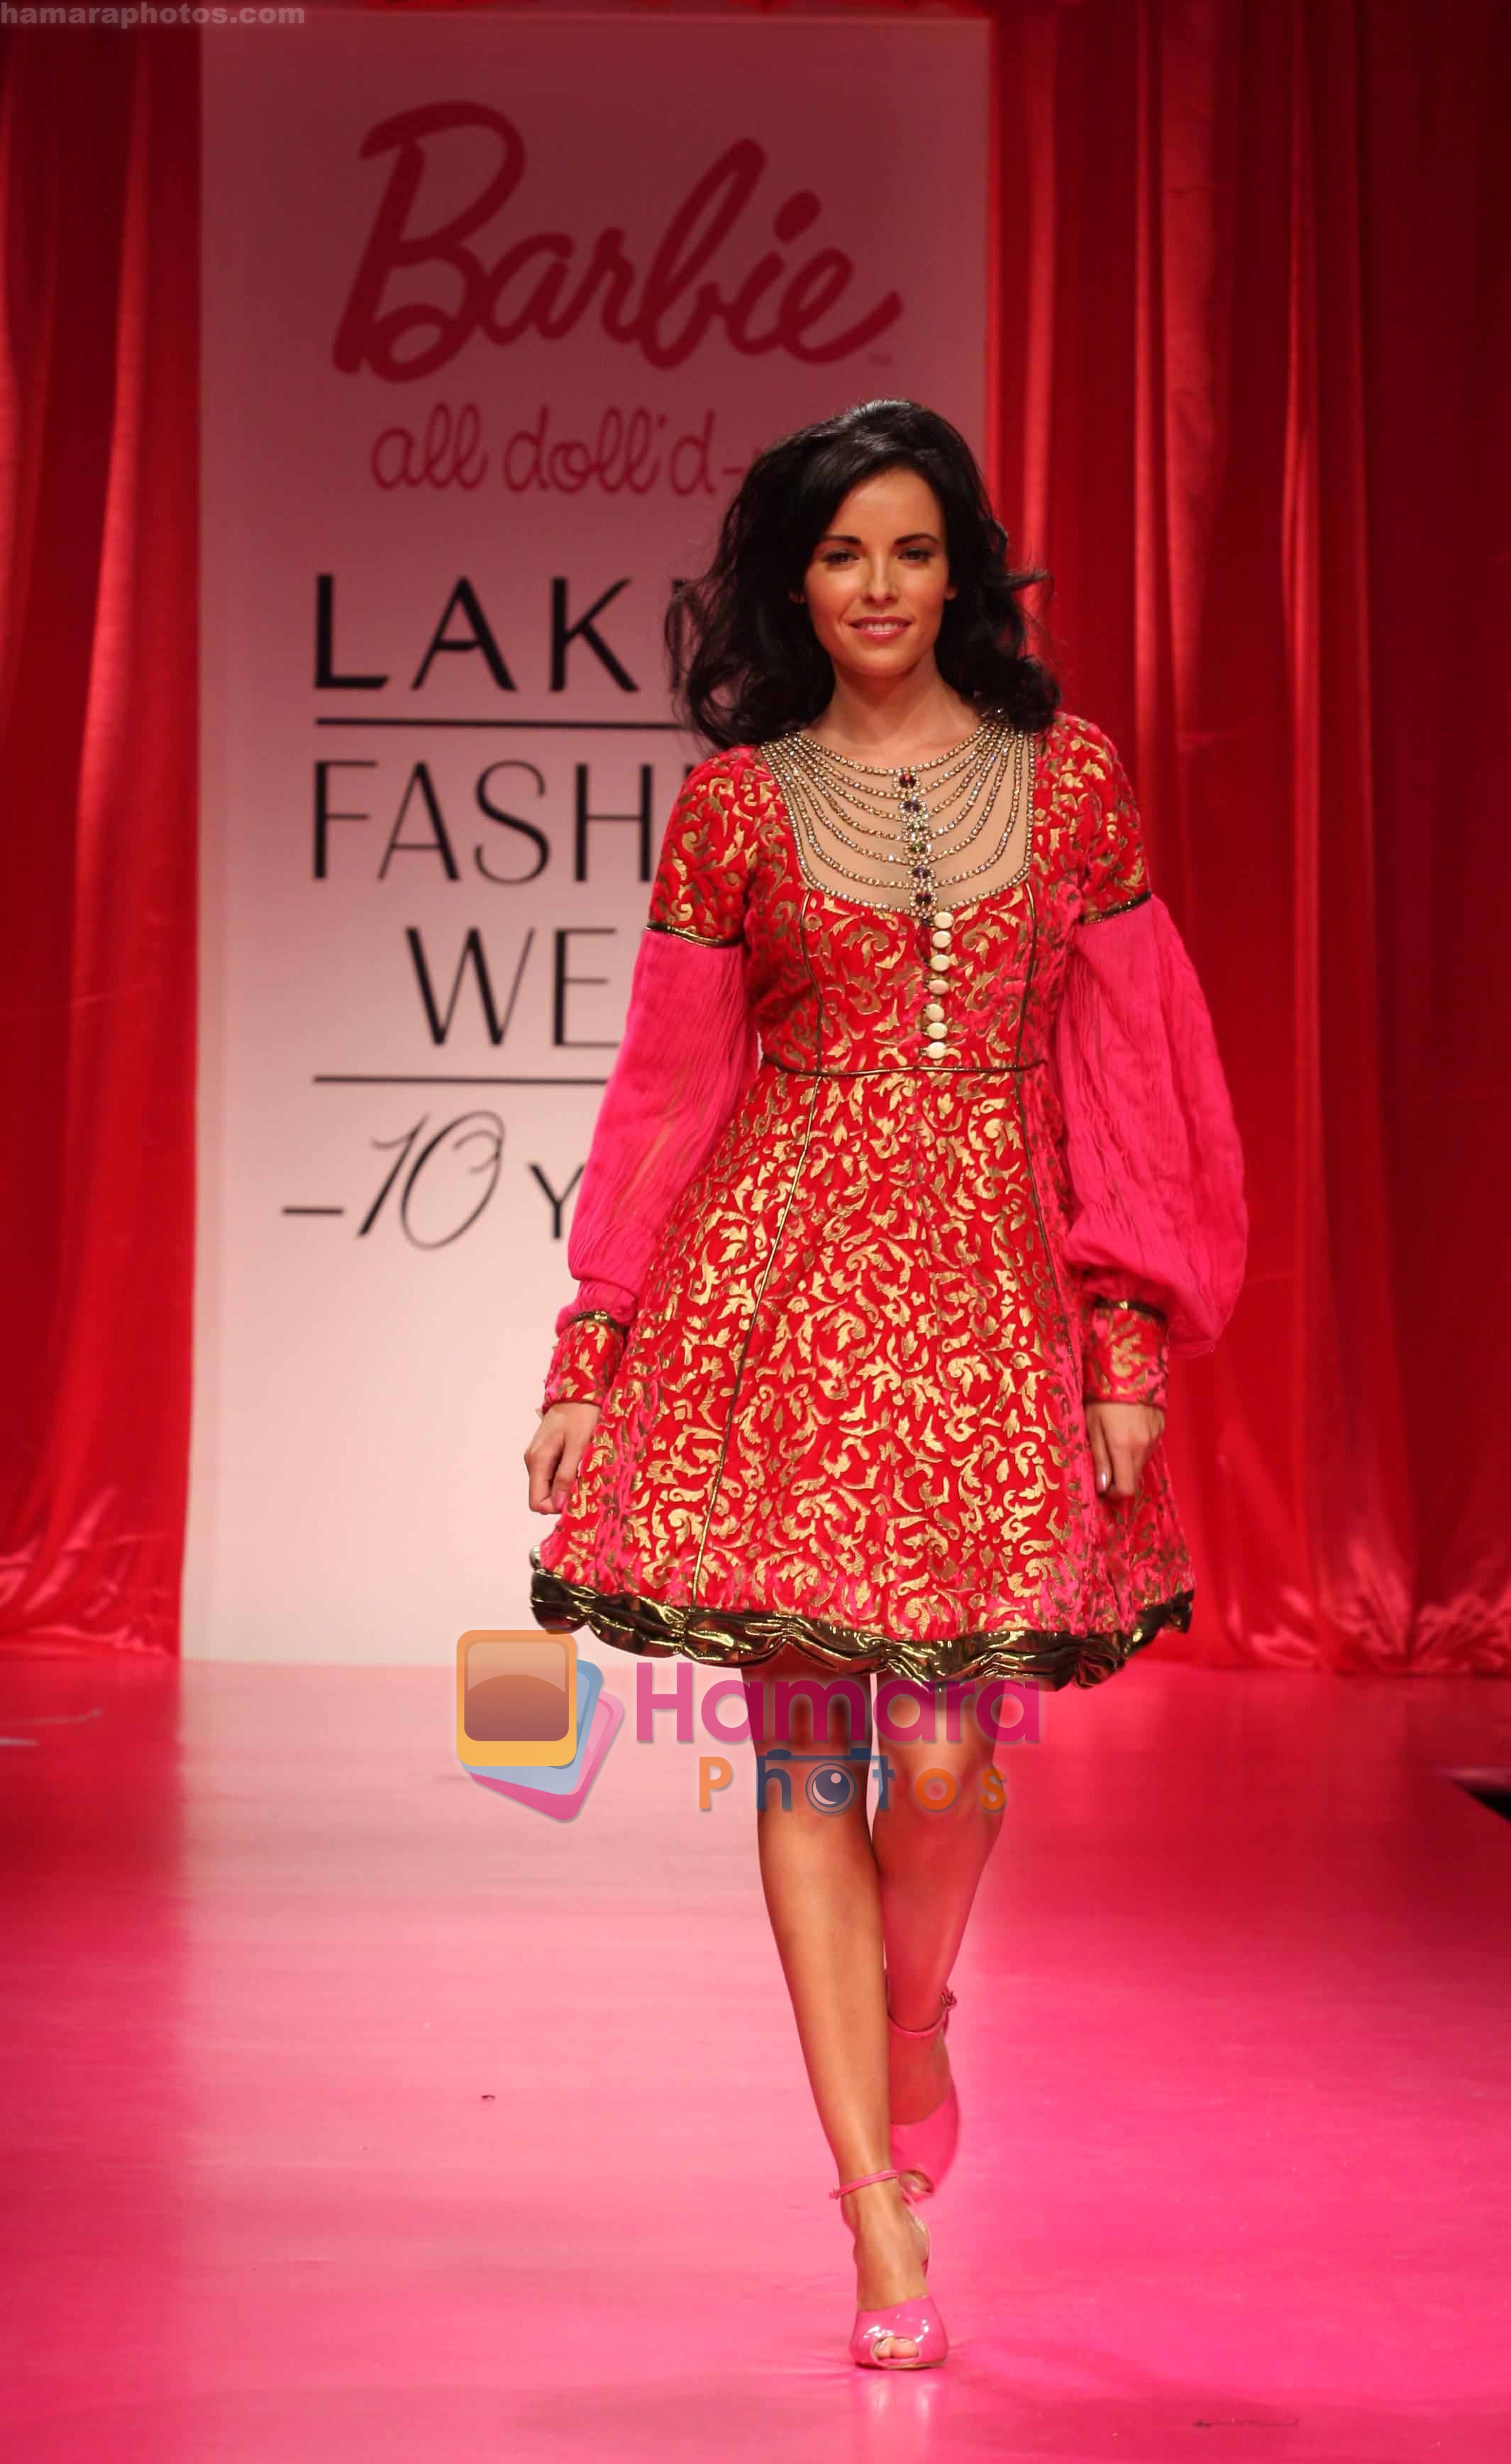 Barbie All Doll_d Up at Lakme Fashion Week Fall Winter 2009 